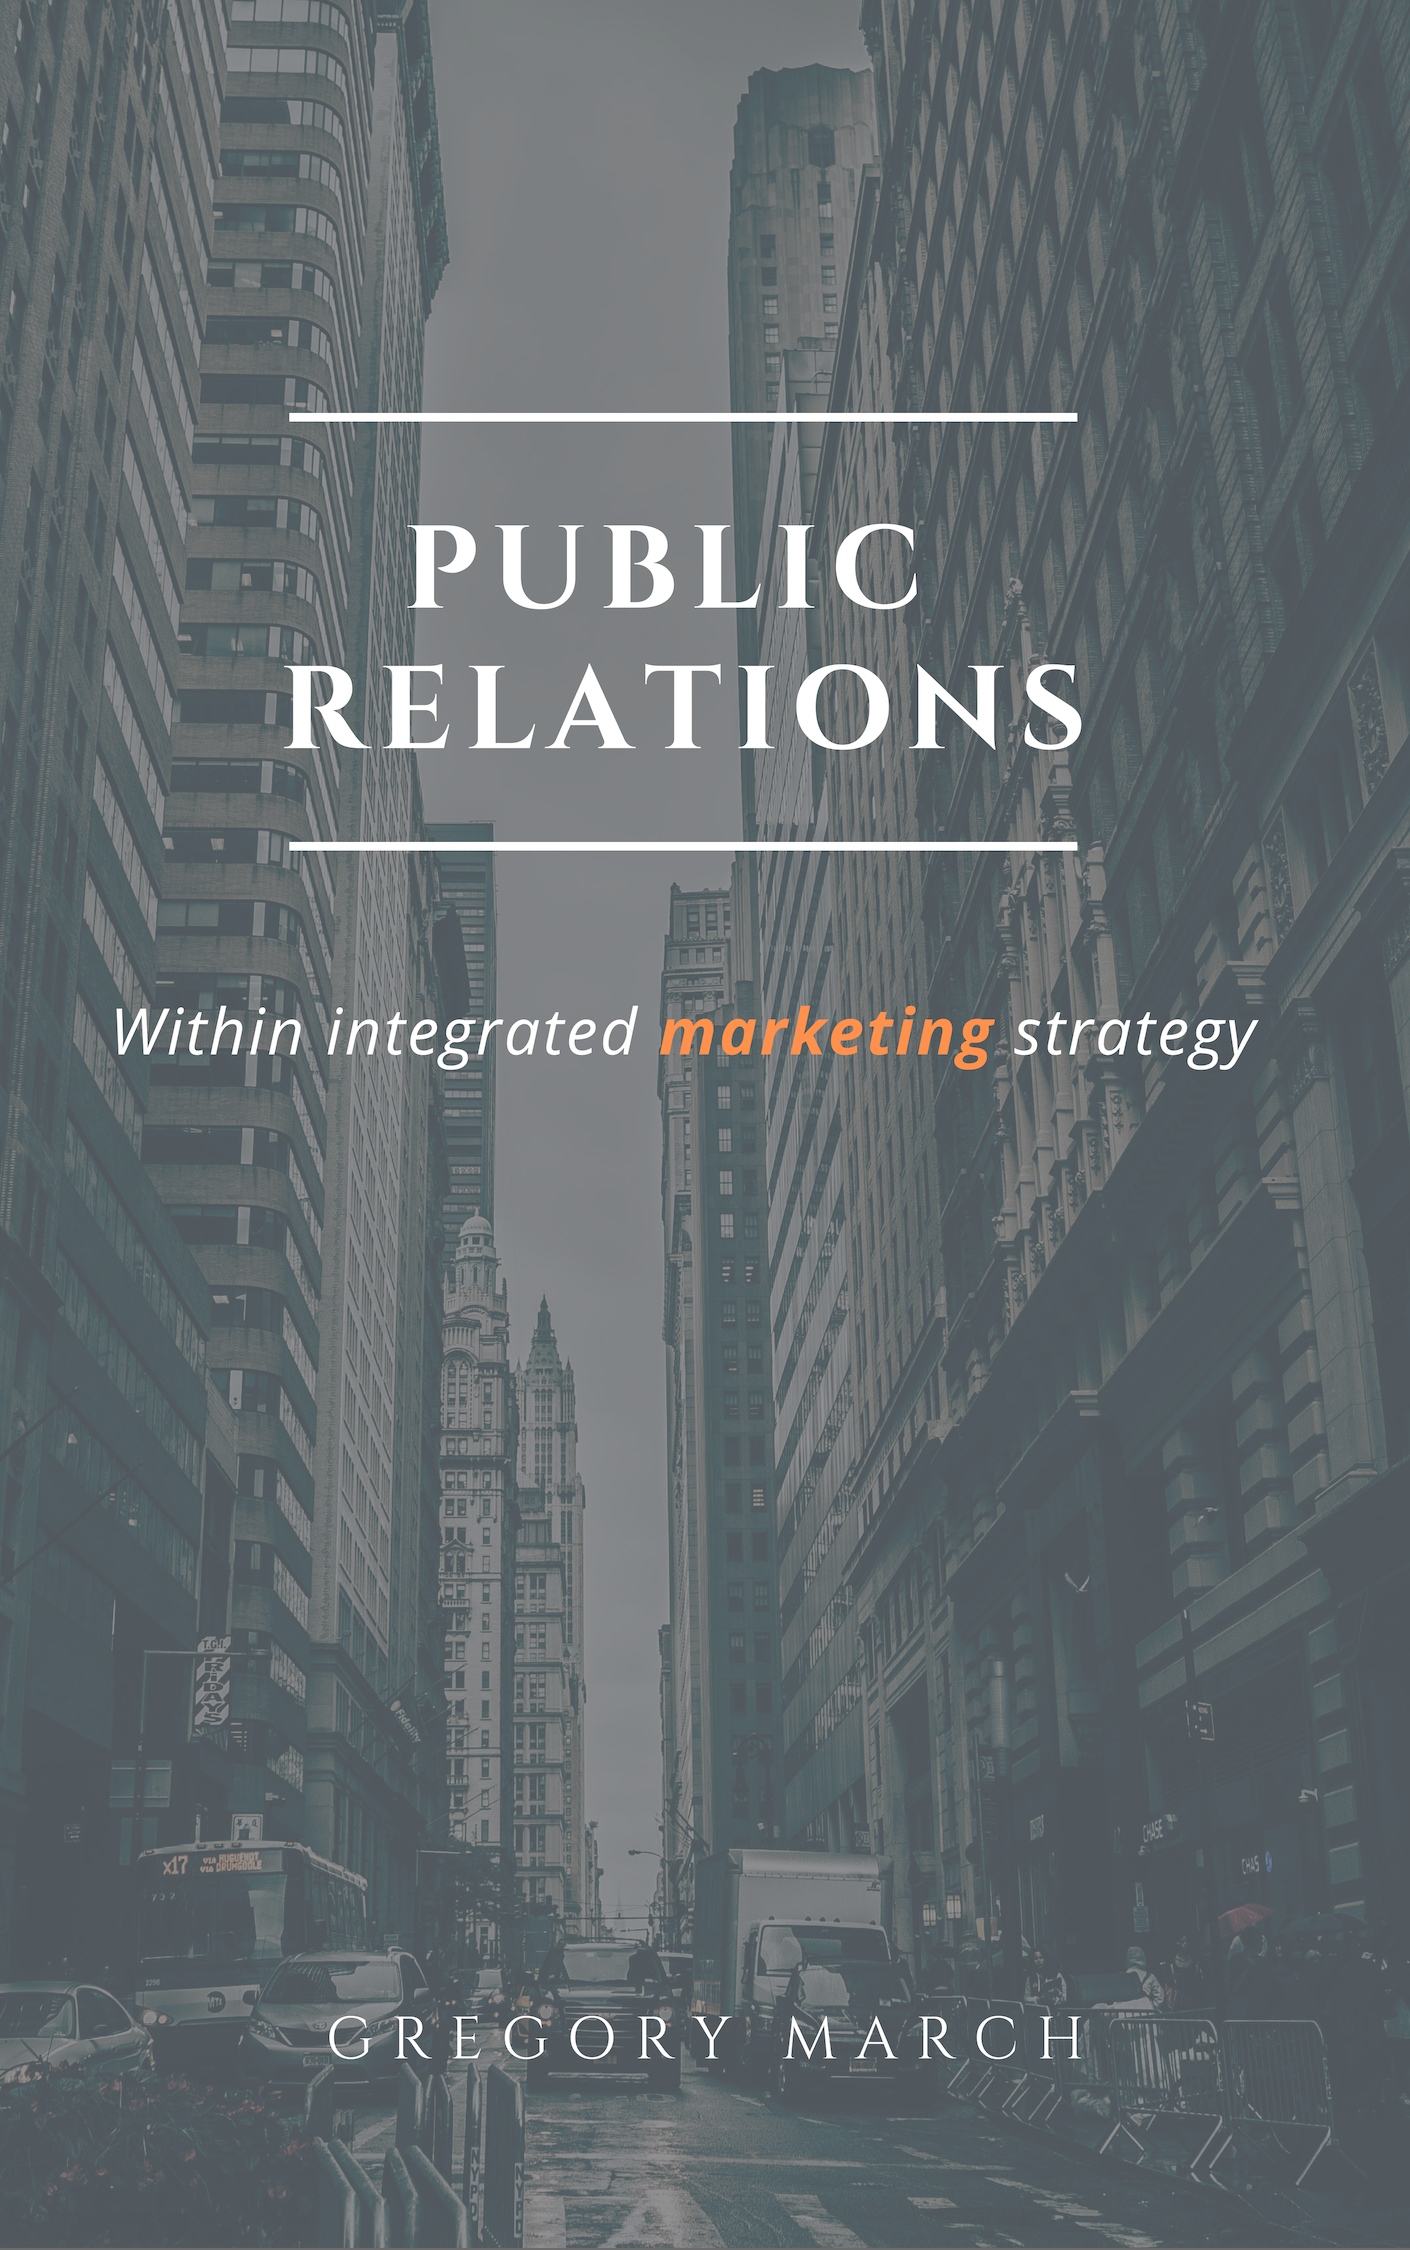 FREE: Public Relations within integrated marketing communications: Public Relations for dummies by Gregory March